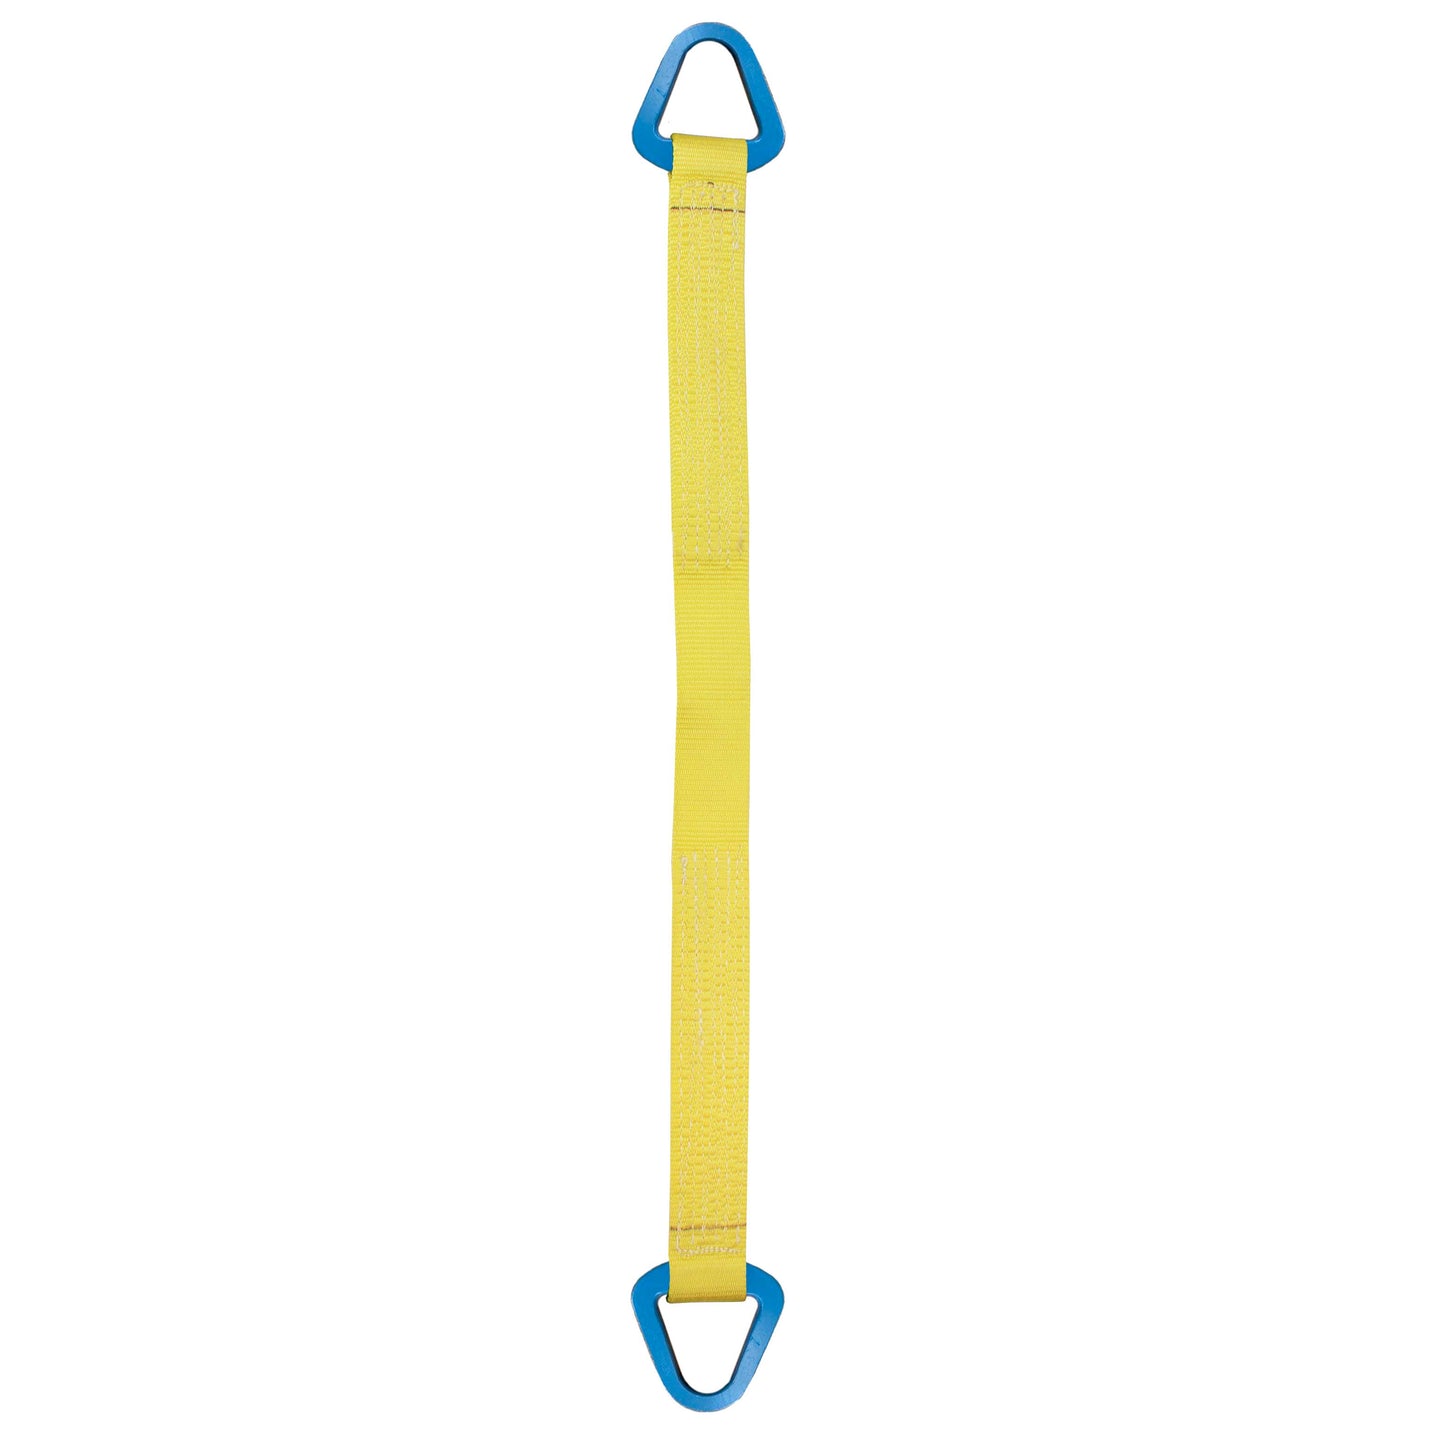 Nylon Lifting Sling Triangle 10 inch x 8 foot 2ply image 1 of 2